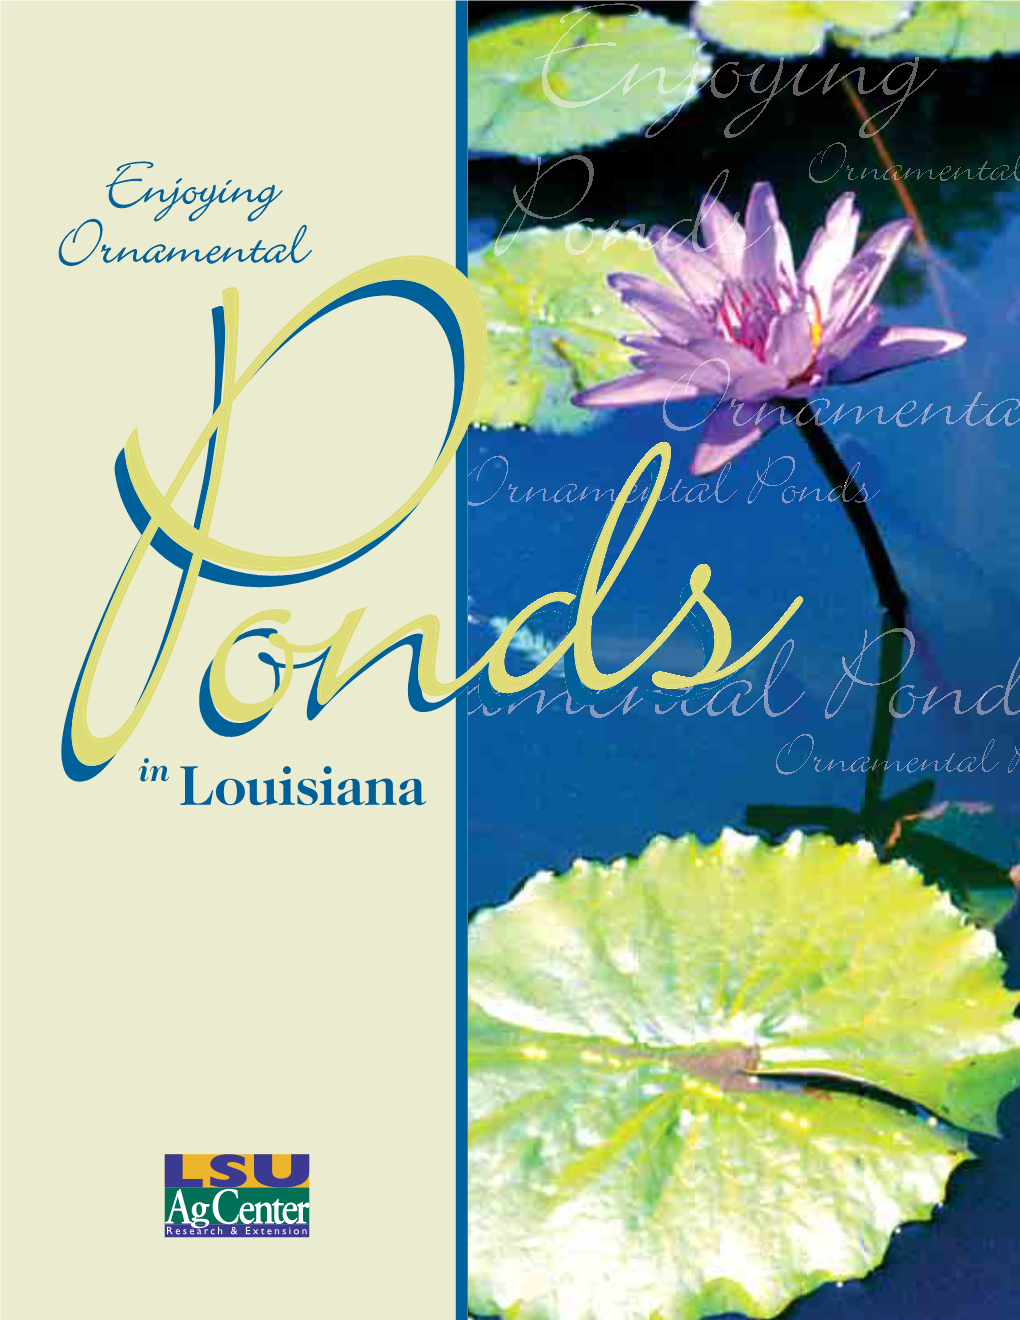 Louisiana Photographs on the Front and Back Covers and Pages 3, 5, 8, 12, 13, 17, Were Shot on Location at Ewing Aquatech Pools, Baton Rouge, Louisiana